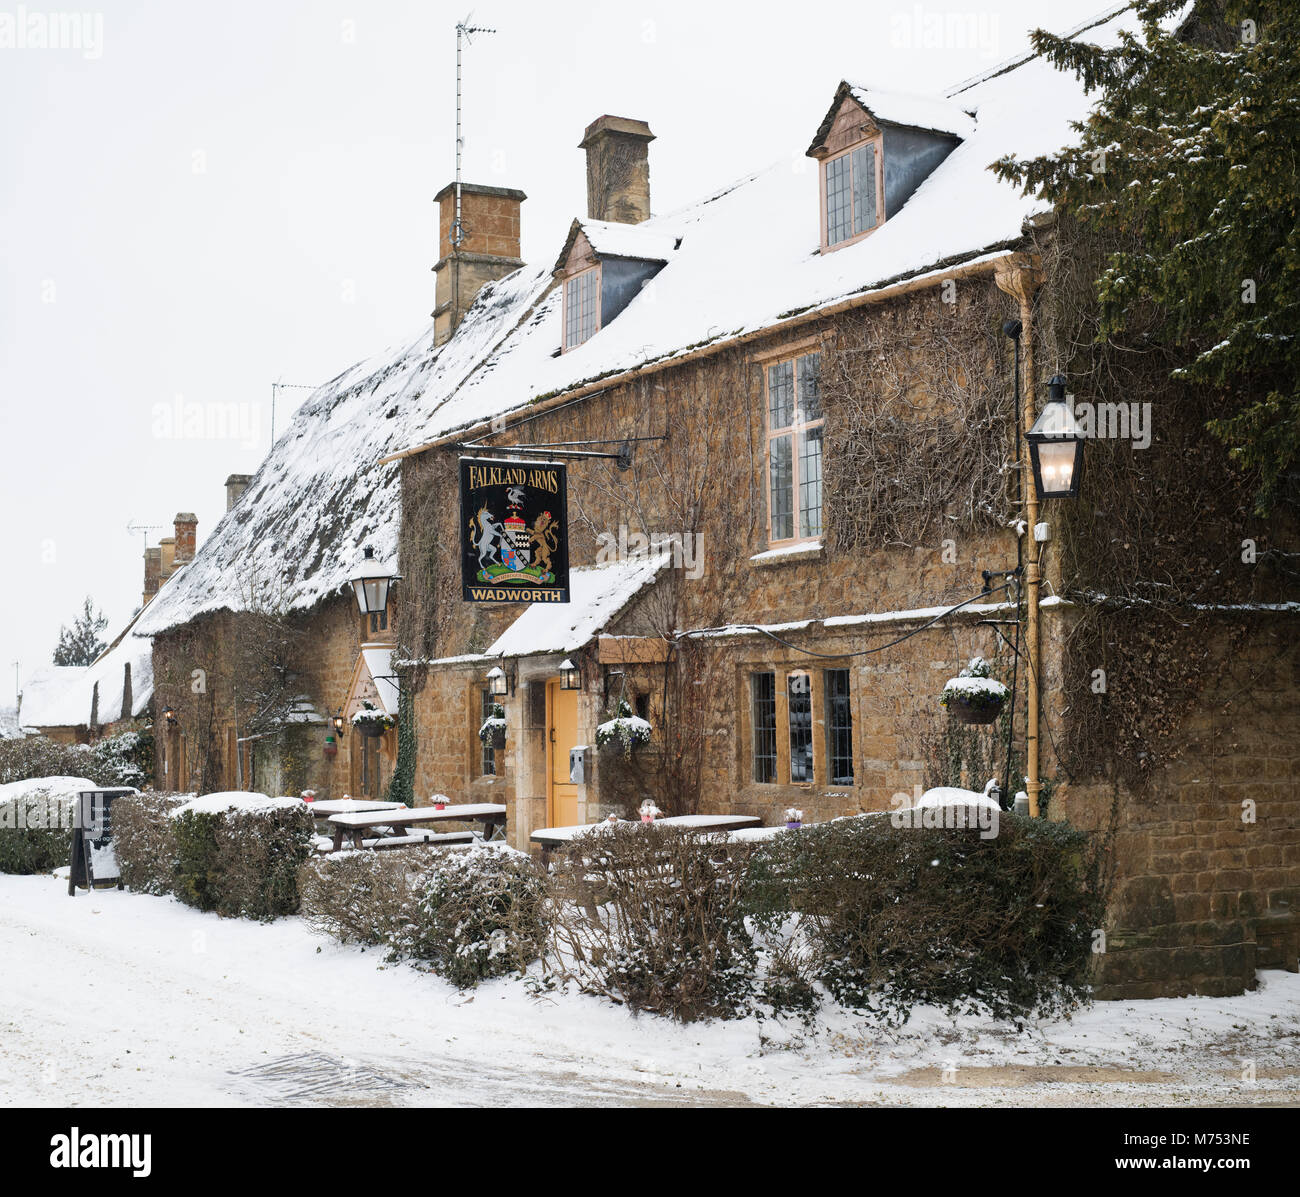 Falkland Arms Pub in großer Tew im im Schnee. Große Tew, Cotswolds, Oxfordshire, England Stockfoto